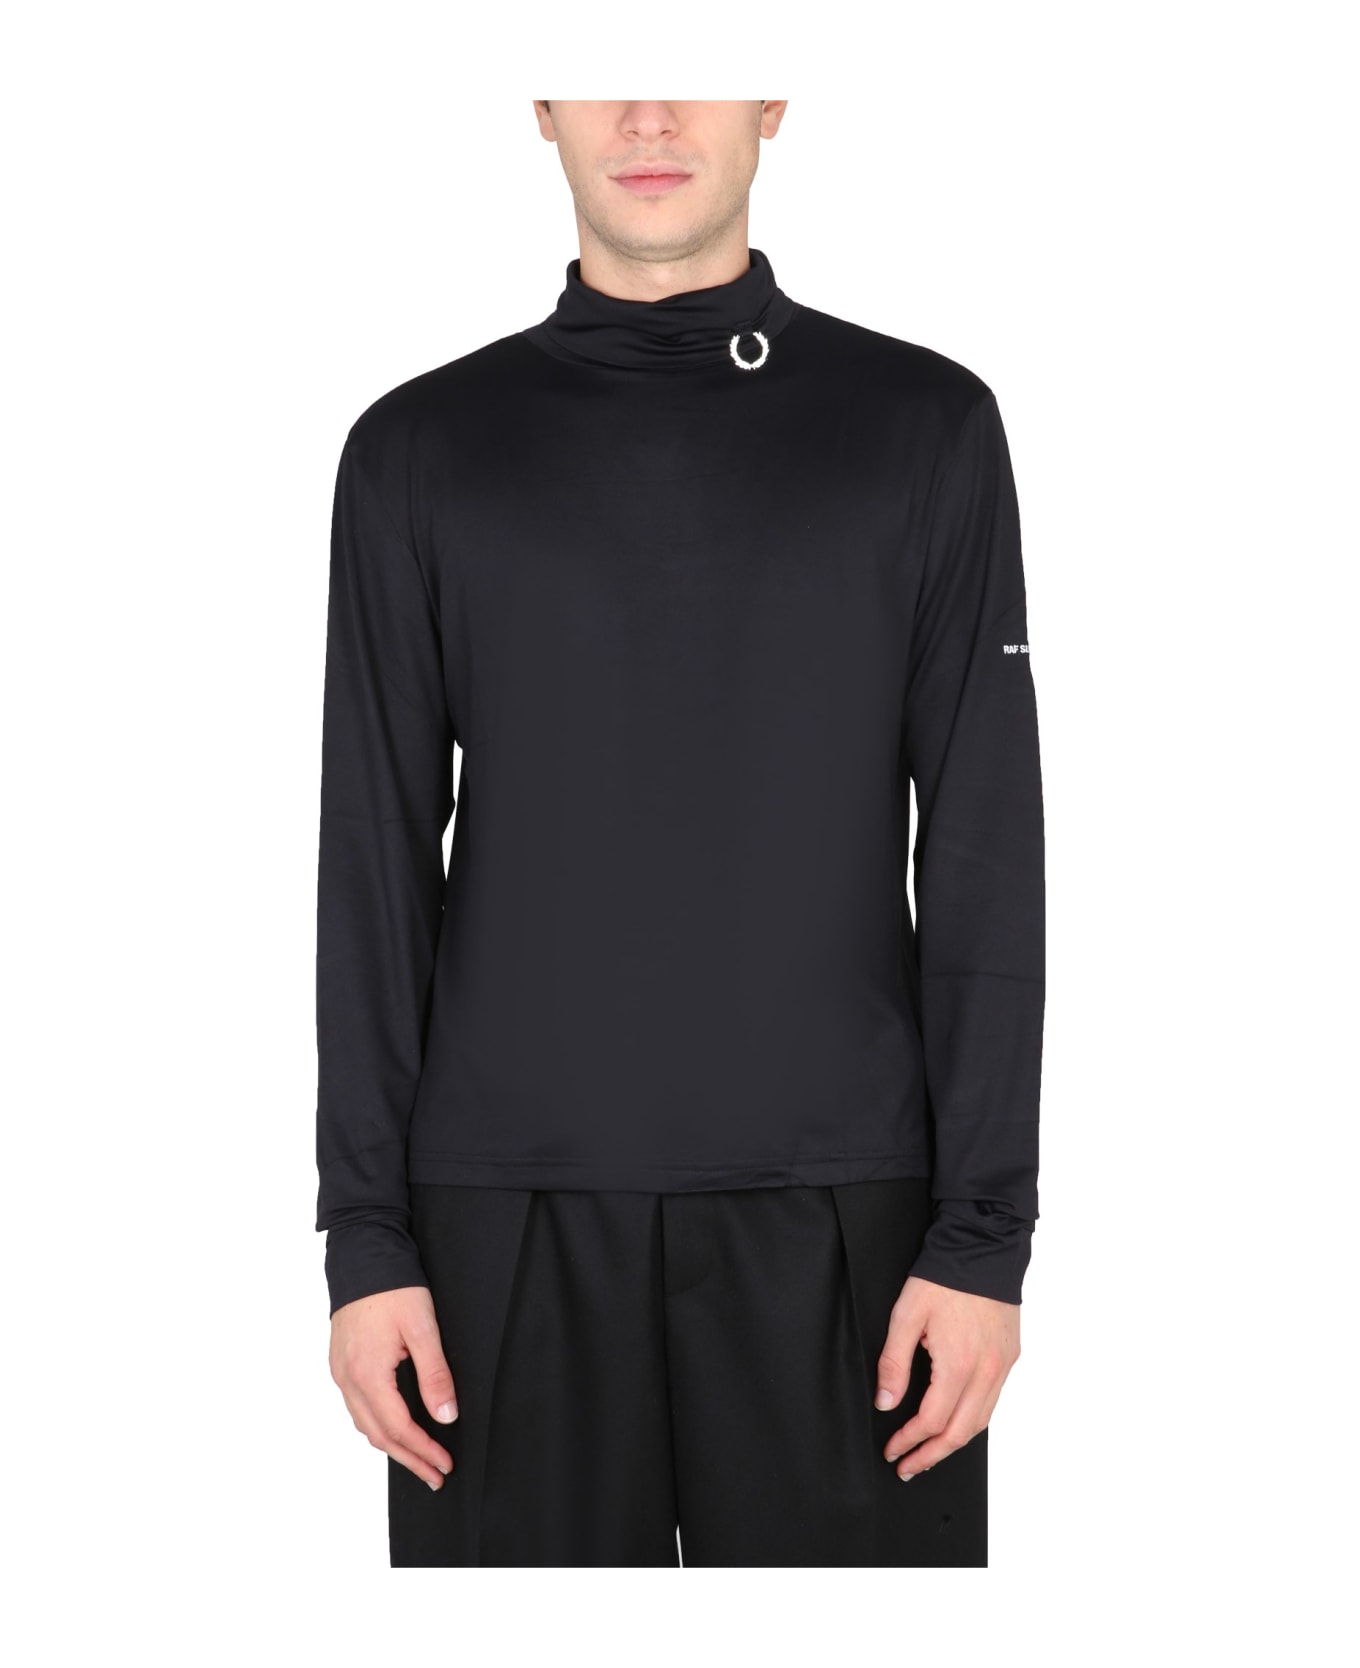 Fred Perry by Raf Simons Turtleneck T-shirt - NERO